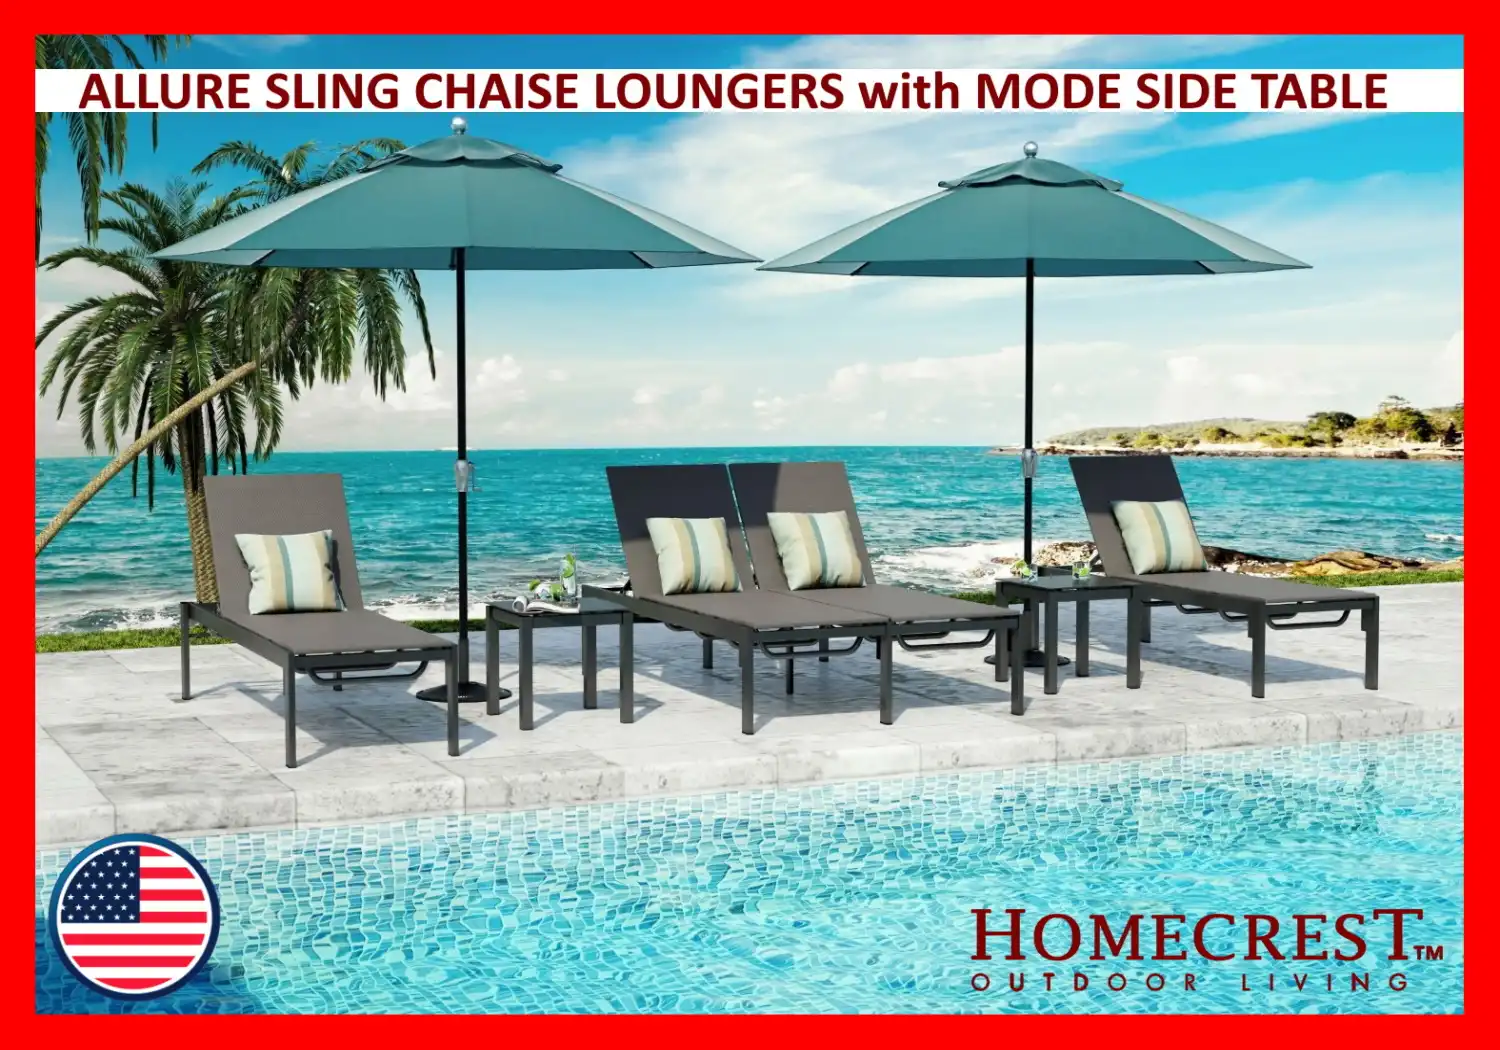 ALLURE SLING CHAISE LOUNGERS with MODE SIDE TABLE